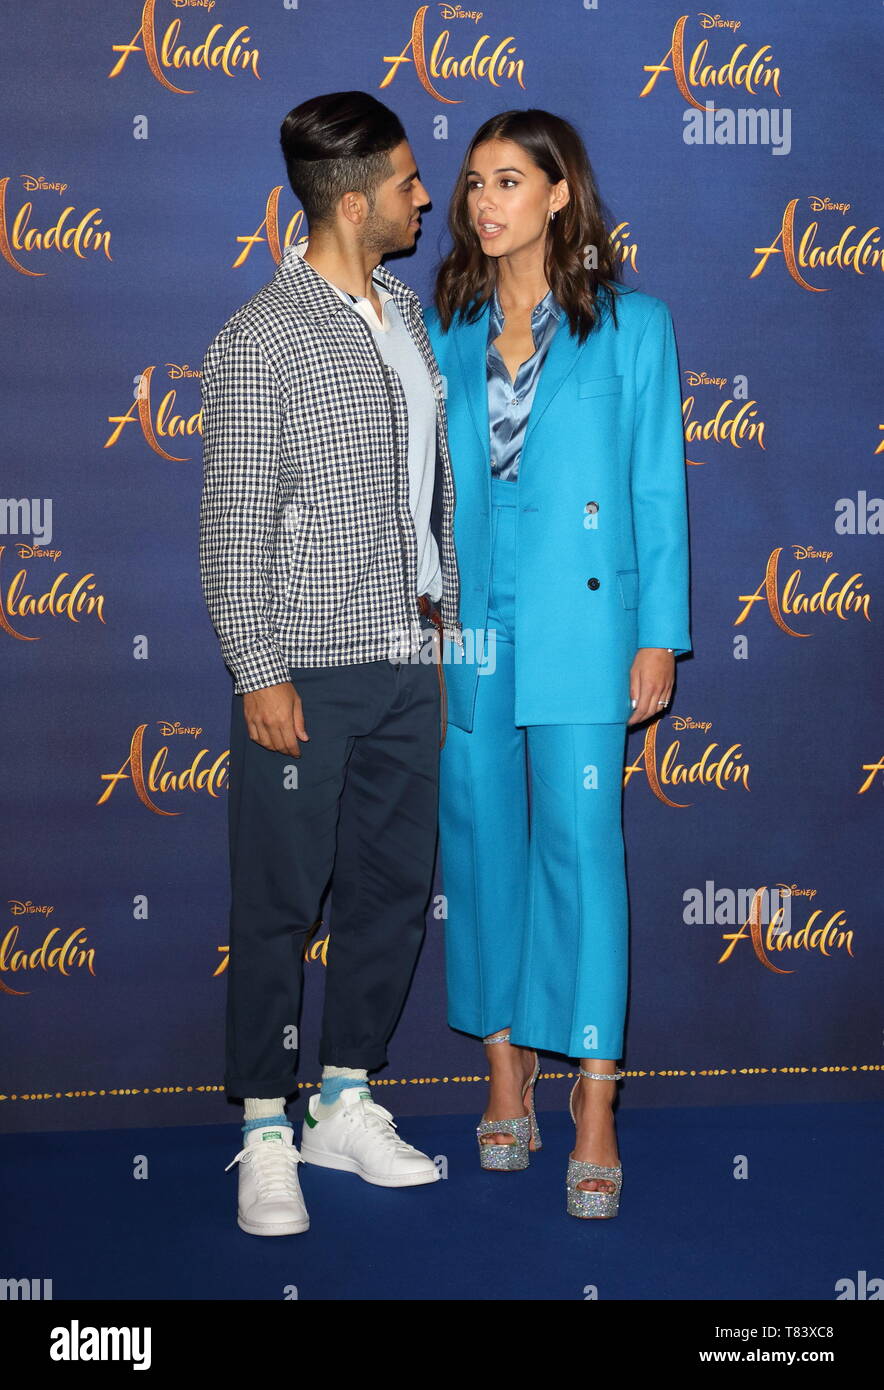 Mena Massoud and Naomi Scott seen at the Aladdin Cast Photocall in the Rosewood Hotel, Holborn. Stock Photo